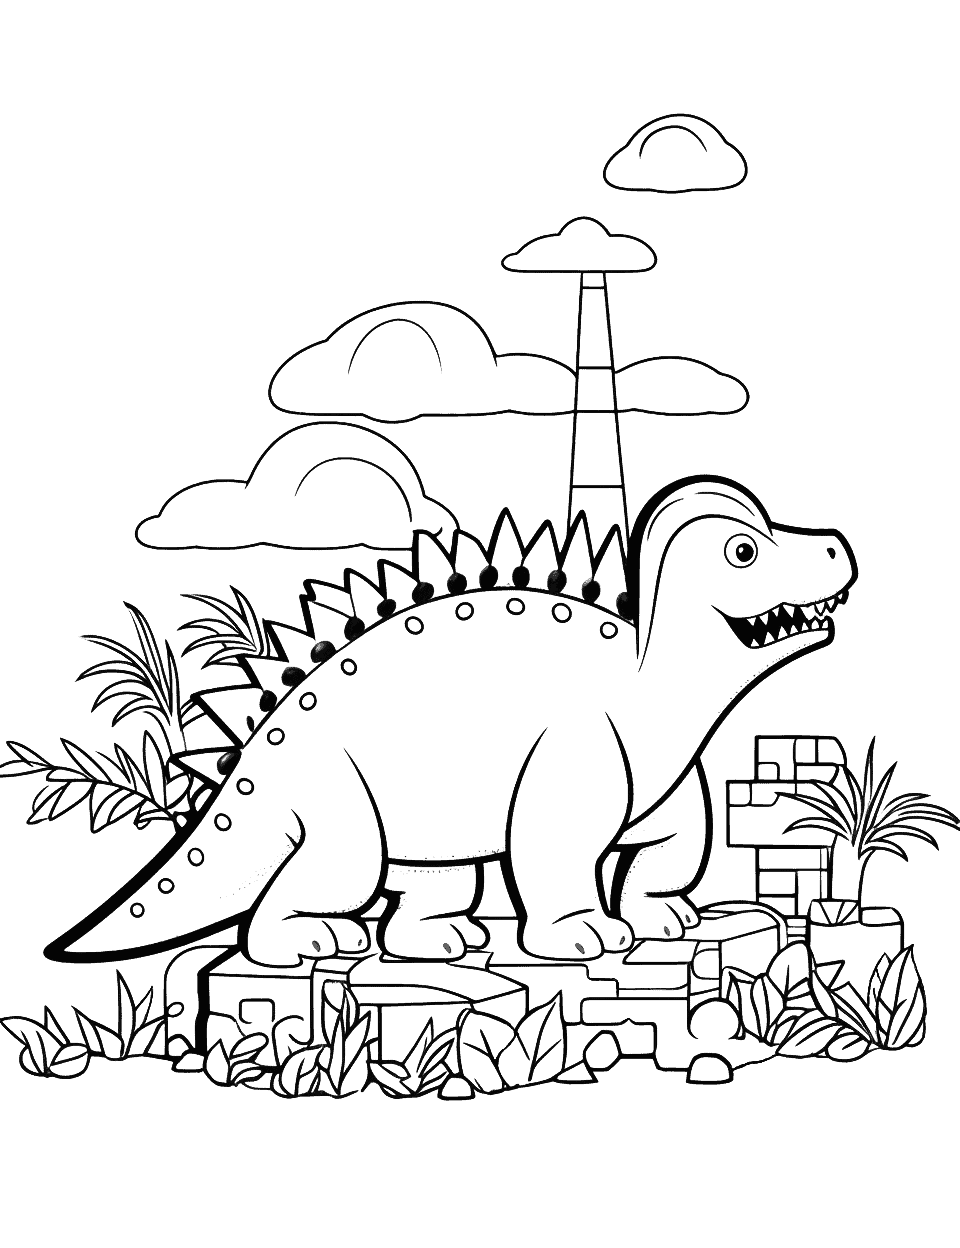 Lego Dinosaur Adventure Coloring Page - An imaginative scene featuring dinosaurs made of Lego blocks.